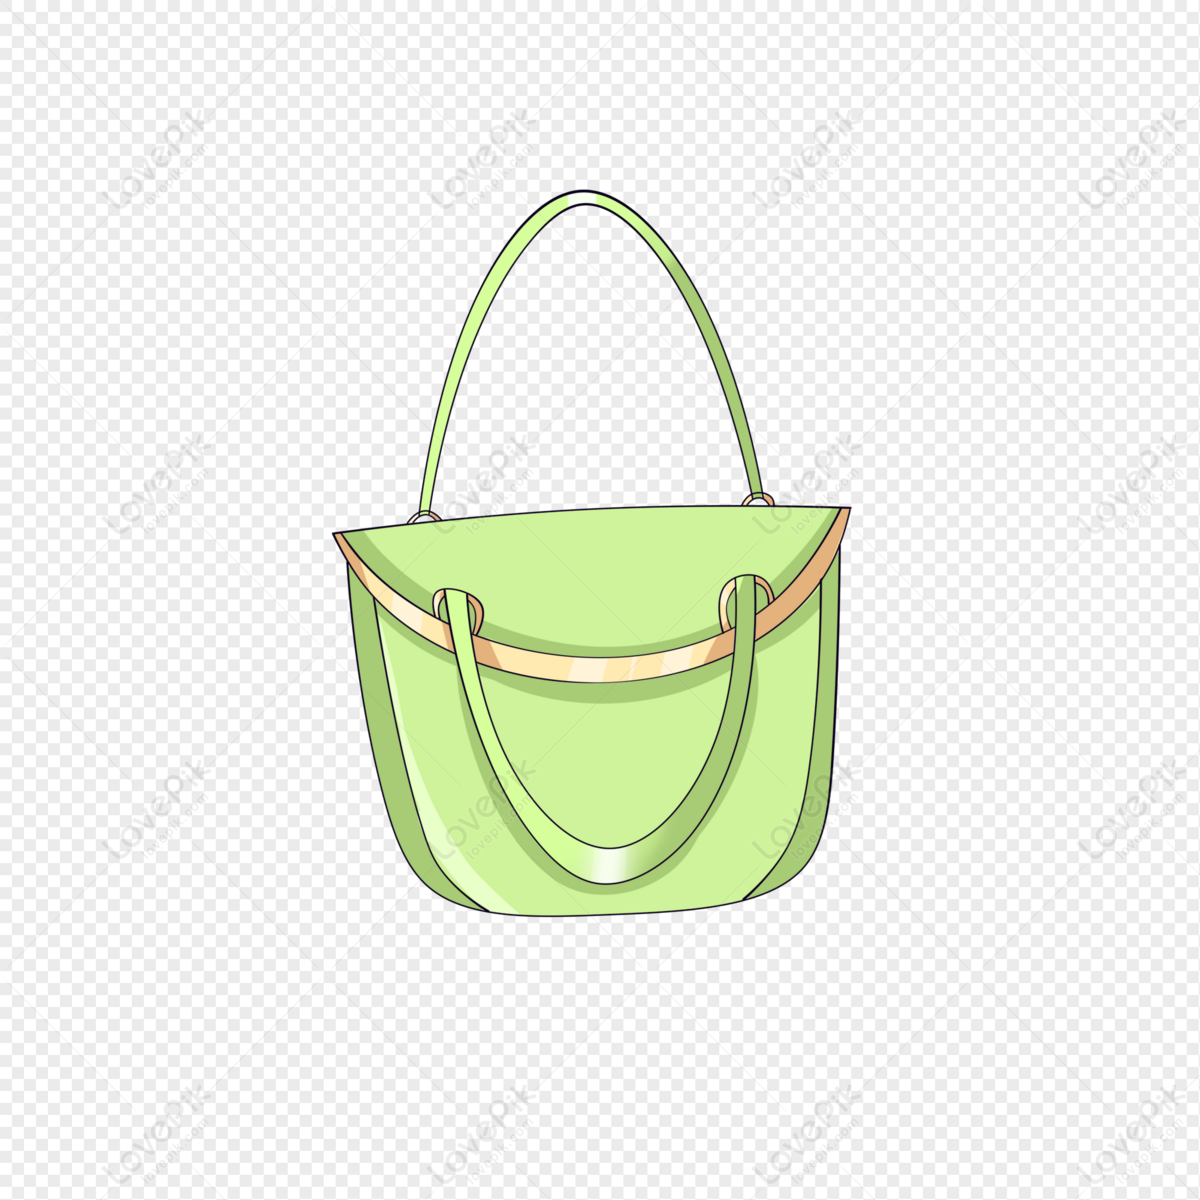 Travel Bag Transparent PNG Clip Art Image​ | Gallery Yopriceville -  High-Quality Free Images and Transparent PNG Clipart